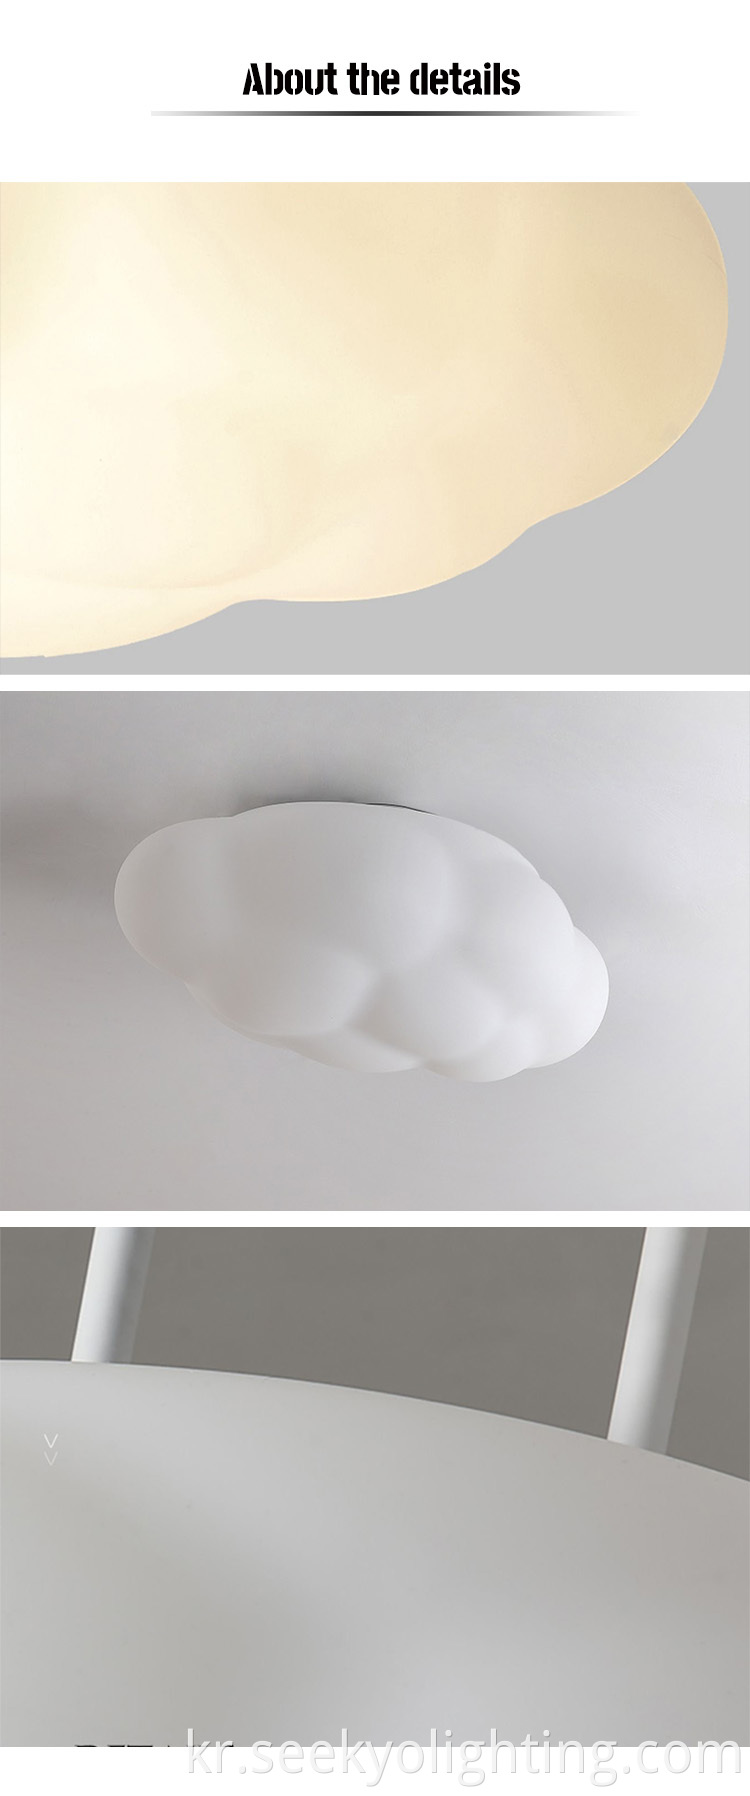 The cloud design adds a playful and whimsical touch to your home decor, making it a great addition to a child's bedroom or a quirky living room.